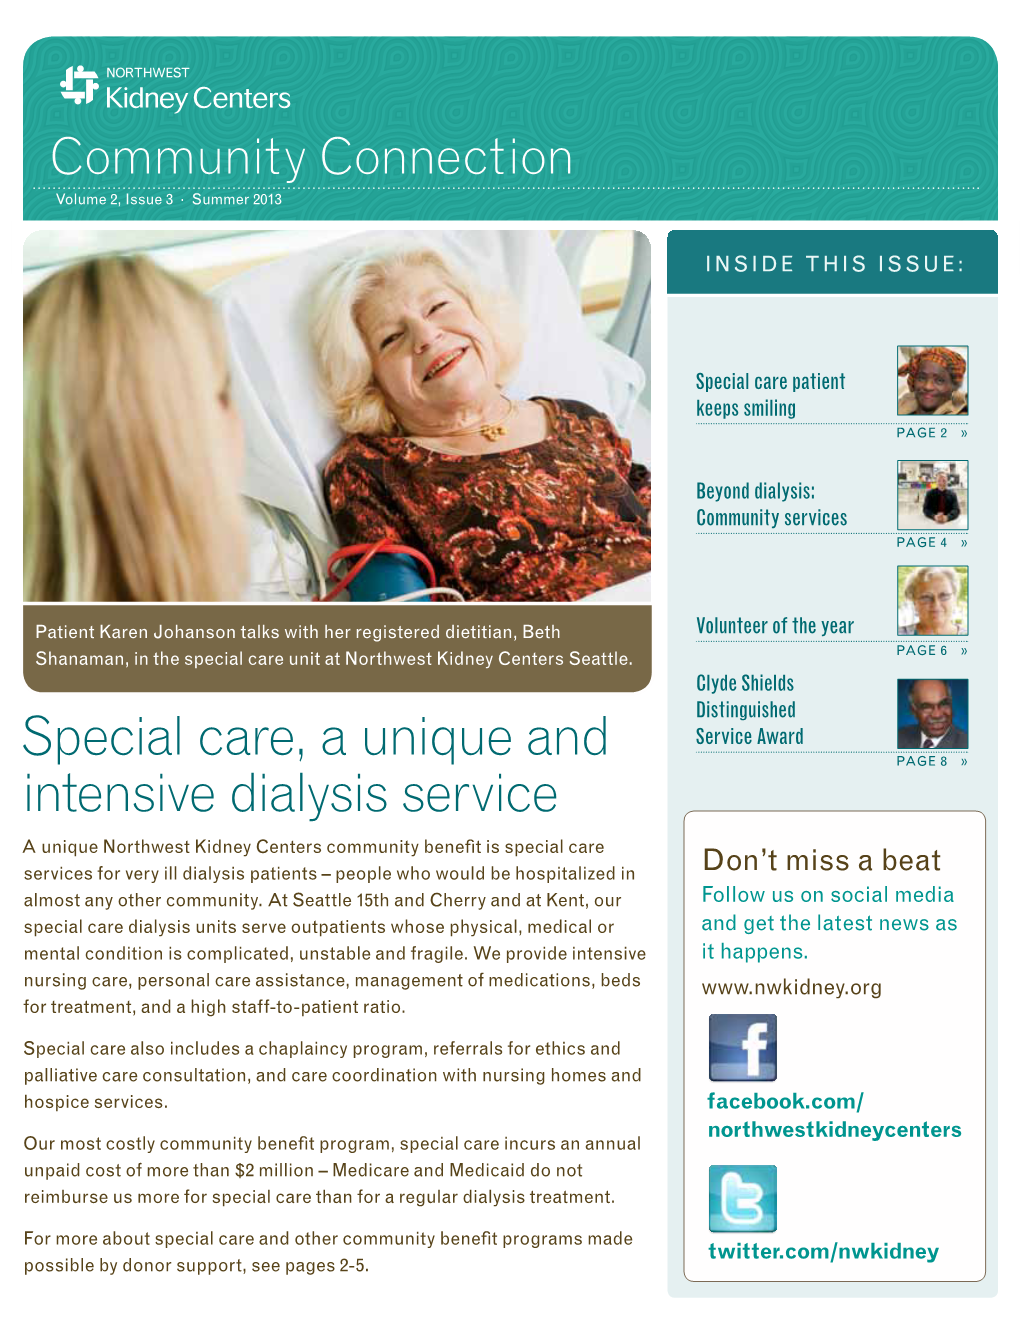 Special Care, a Unique and Intensive Dialysis Service